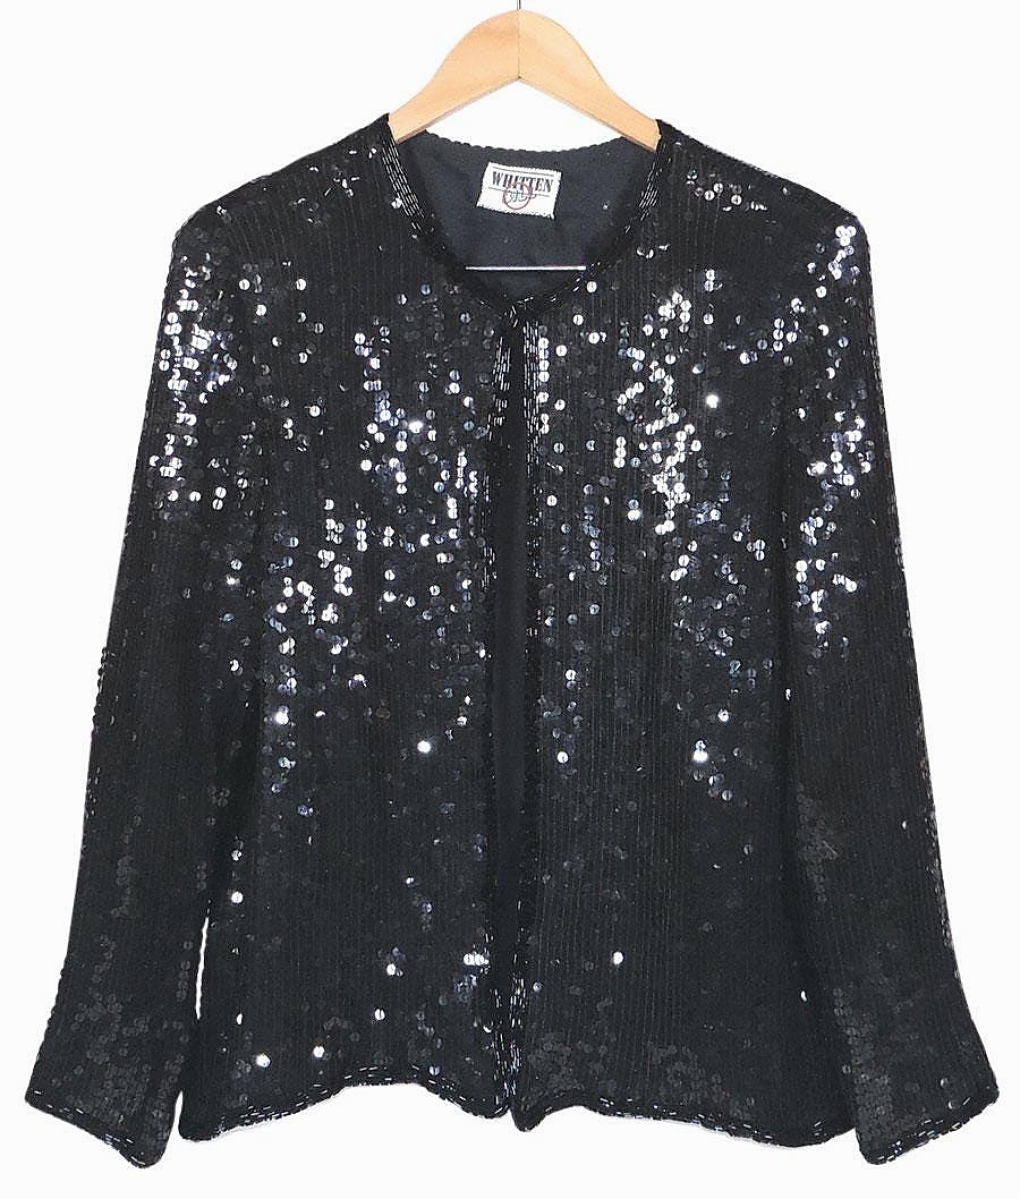 The second highest priced Michael Jackson lot was this “Billie Jean” stage-worn jacket that he wore while performing the first leg of the Bad tour in 1987. Covered in black sequins, the waist-length jacket was one of only five made for Jackson by Bill Whitten for the Bad tour and earned $14,760.